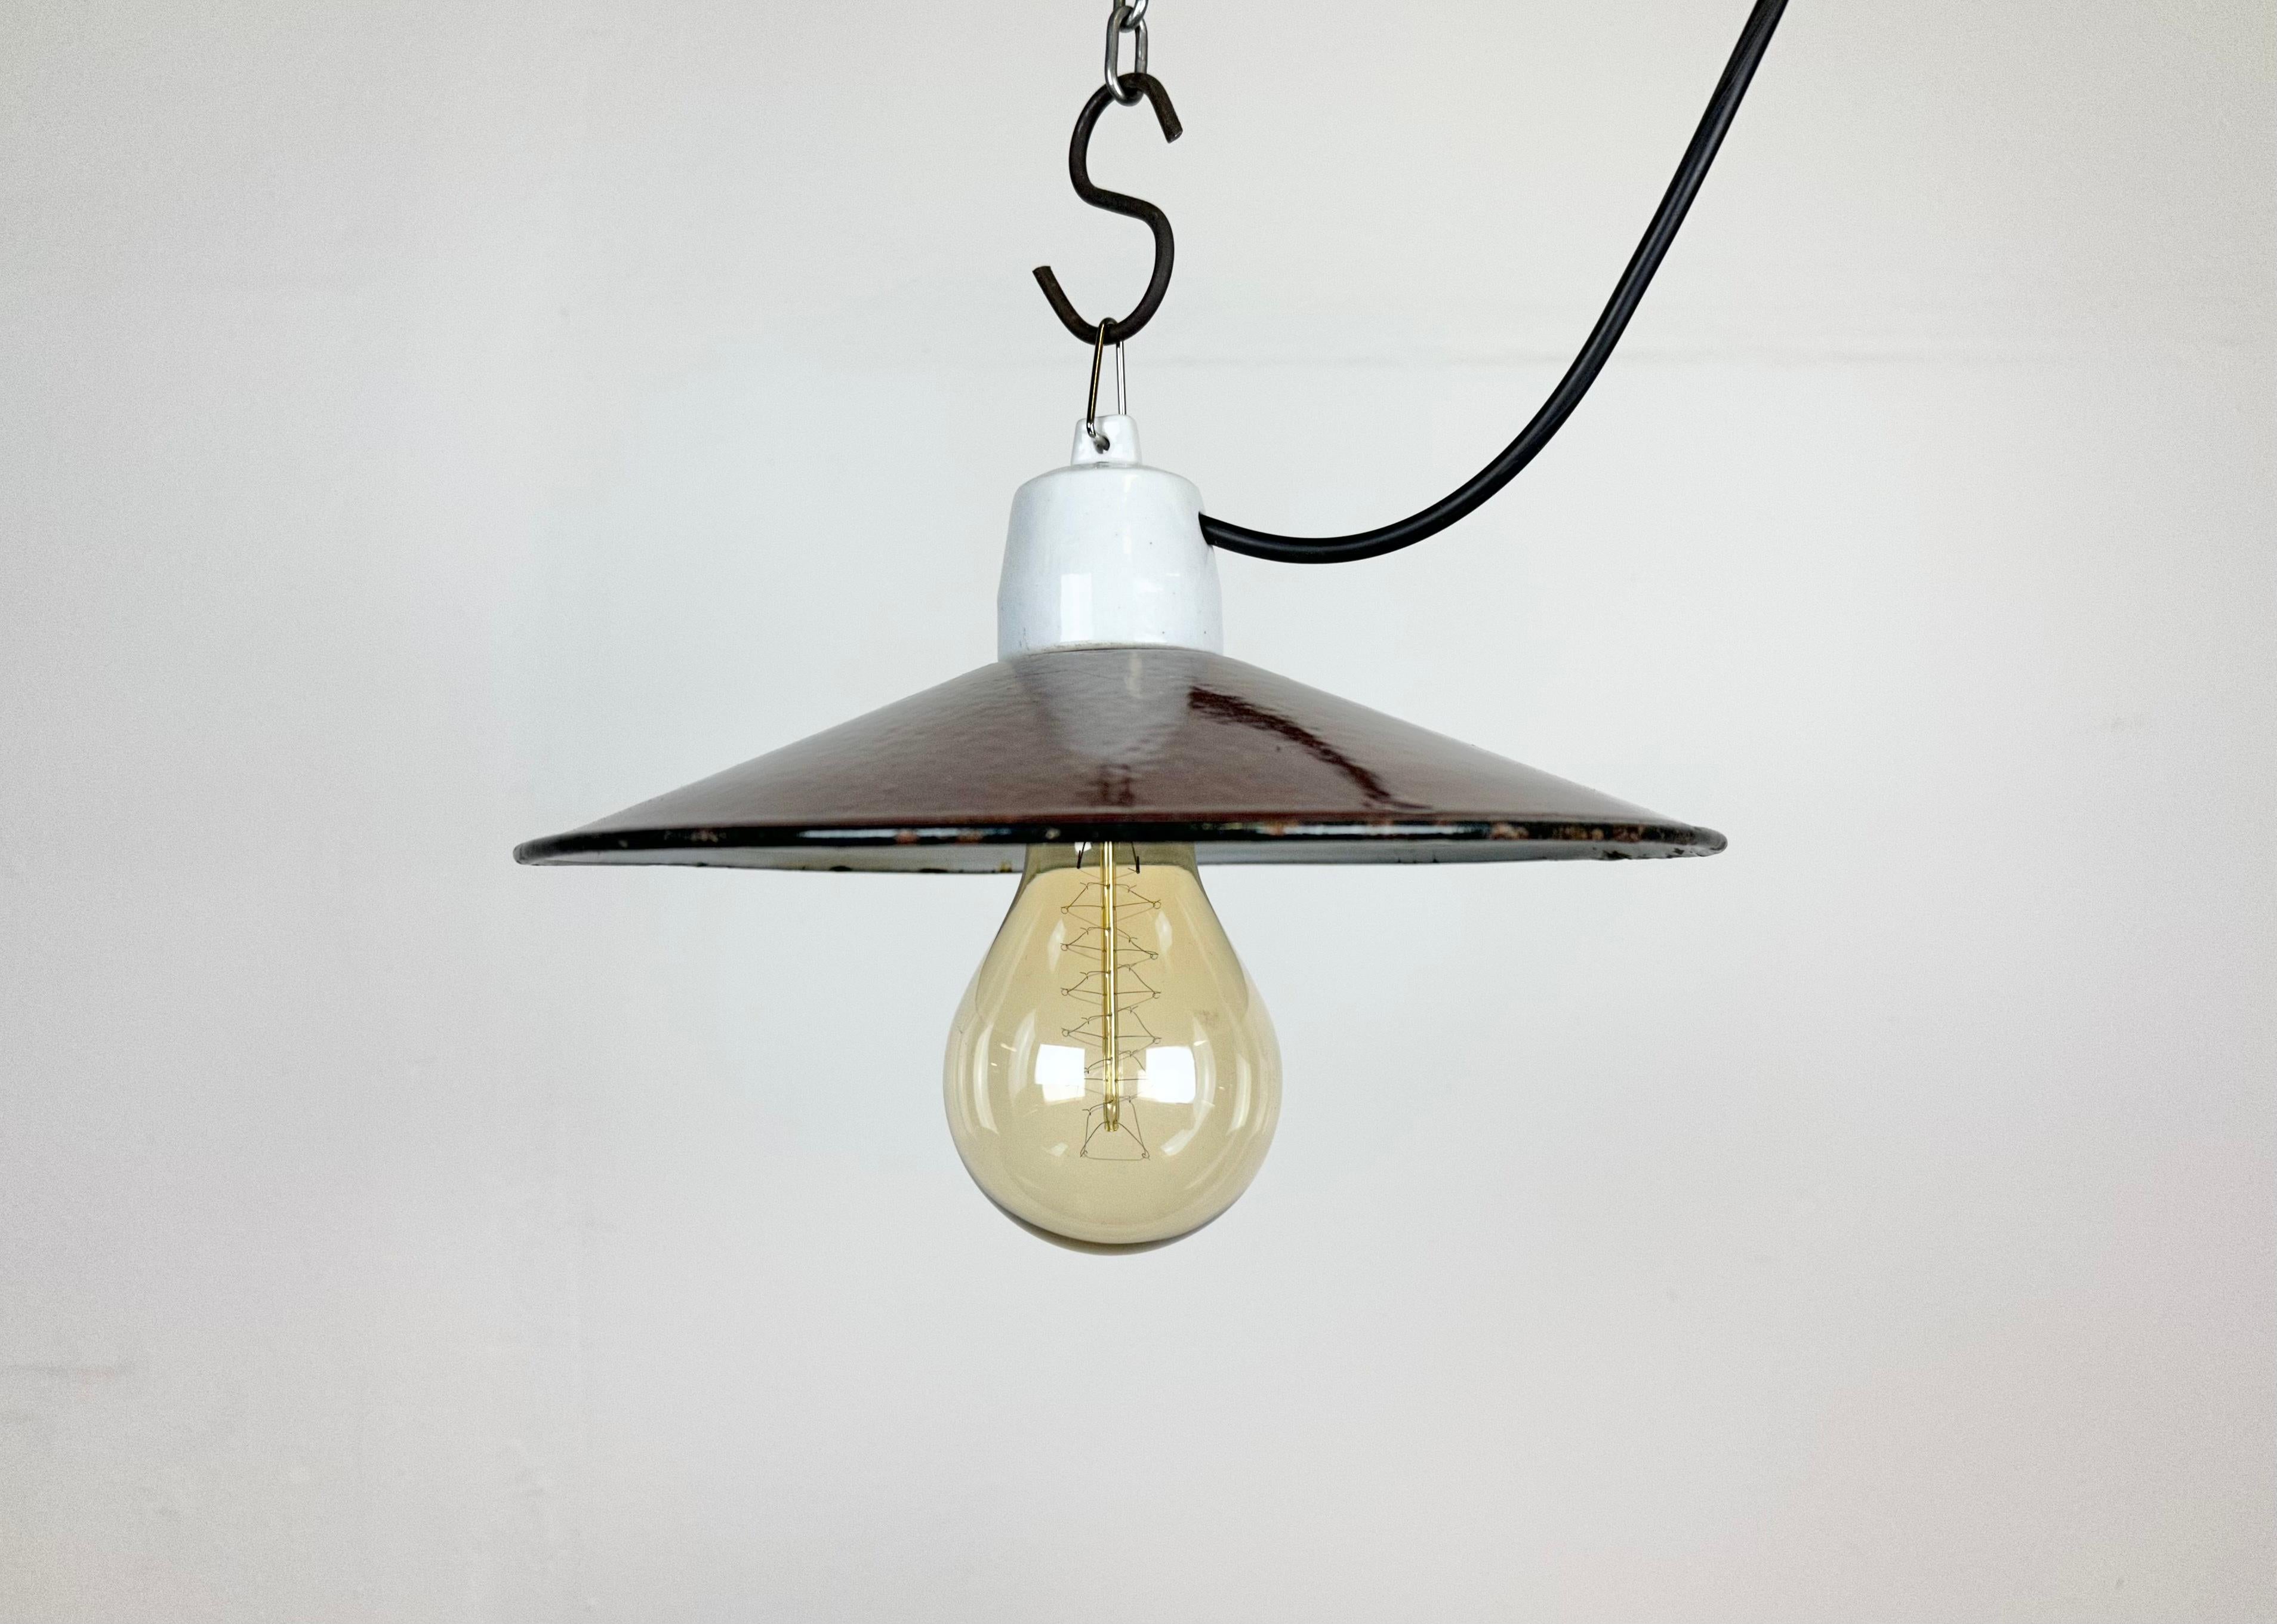 Vintage industrial enamel pendant lamp made in Poland during the 1970s. It features a red enamel shade with white enamel interior and porcelain top. The socket requires E 27/ E 26 light bulbs. The weight of the lamp is 0,5 kg. New wire.